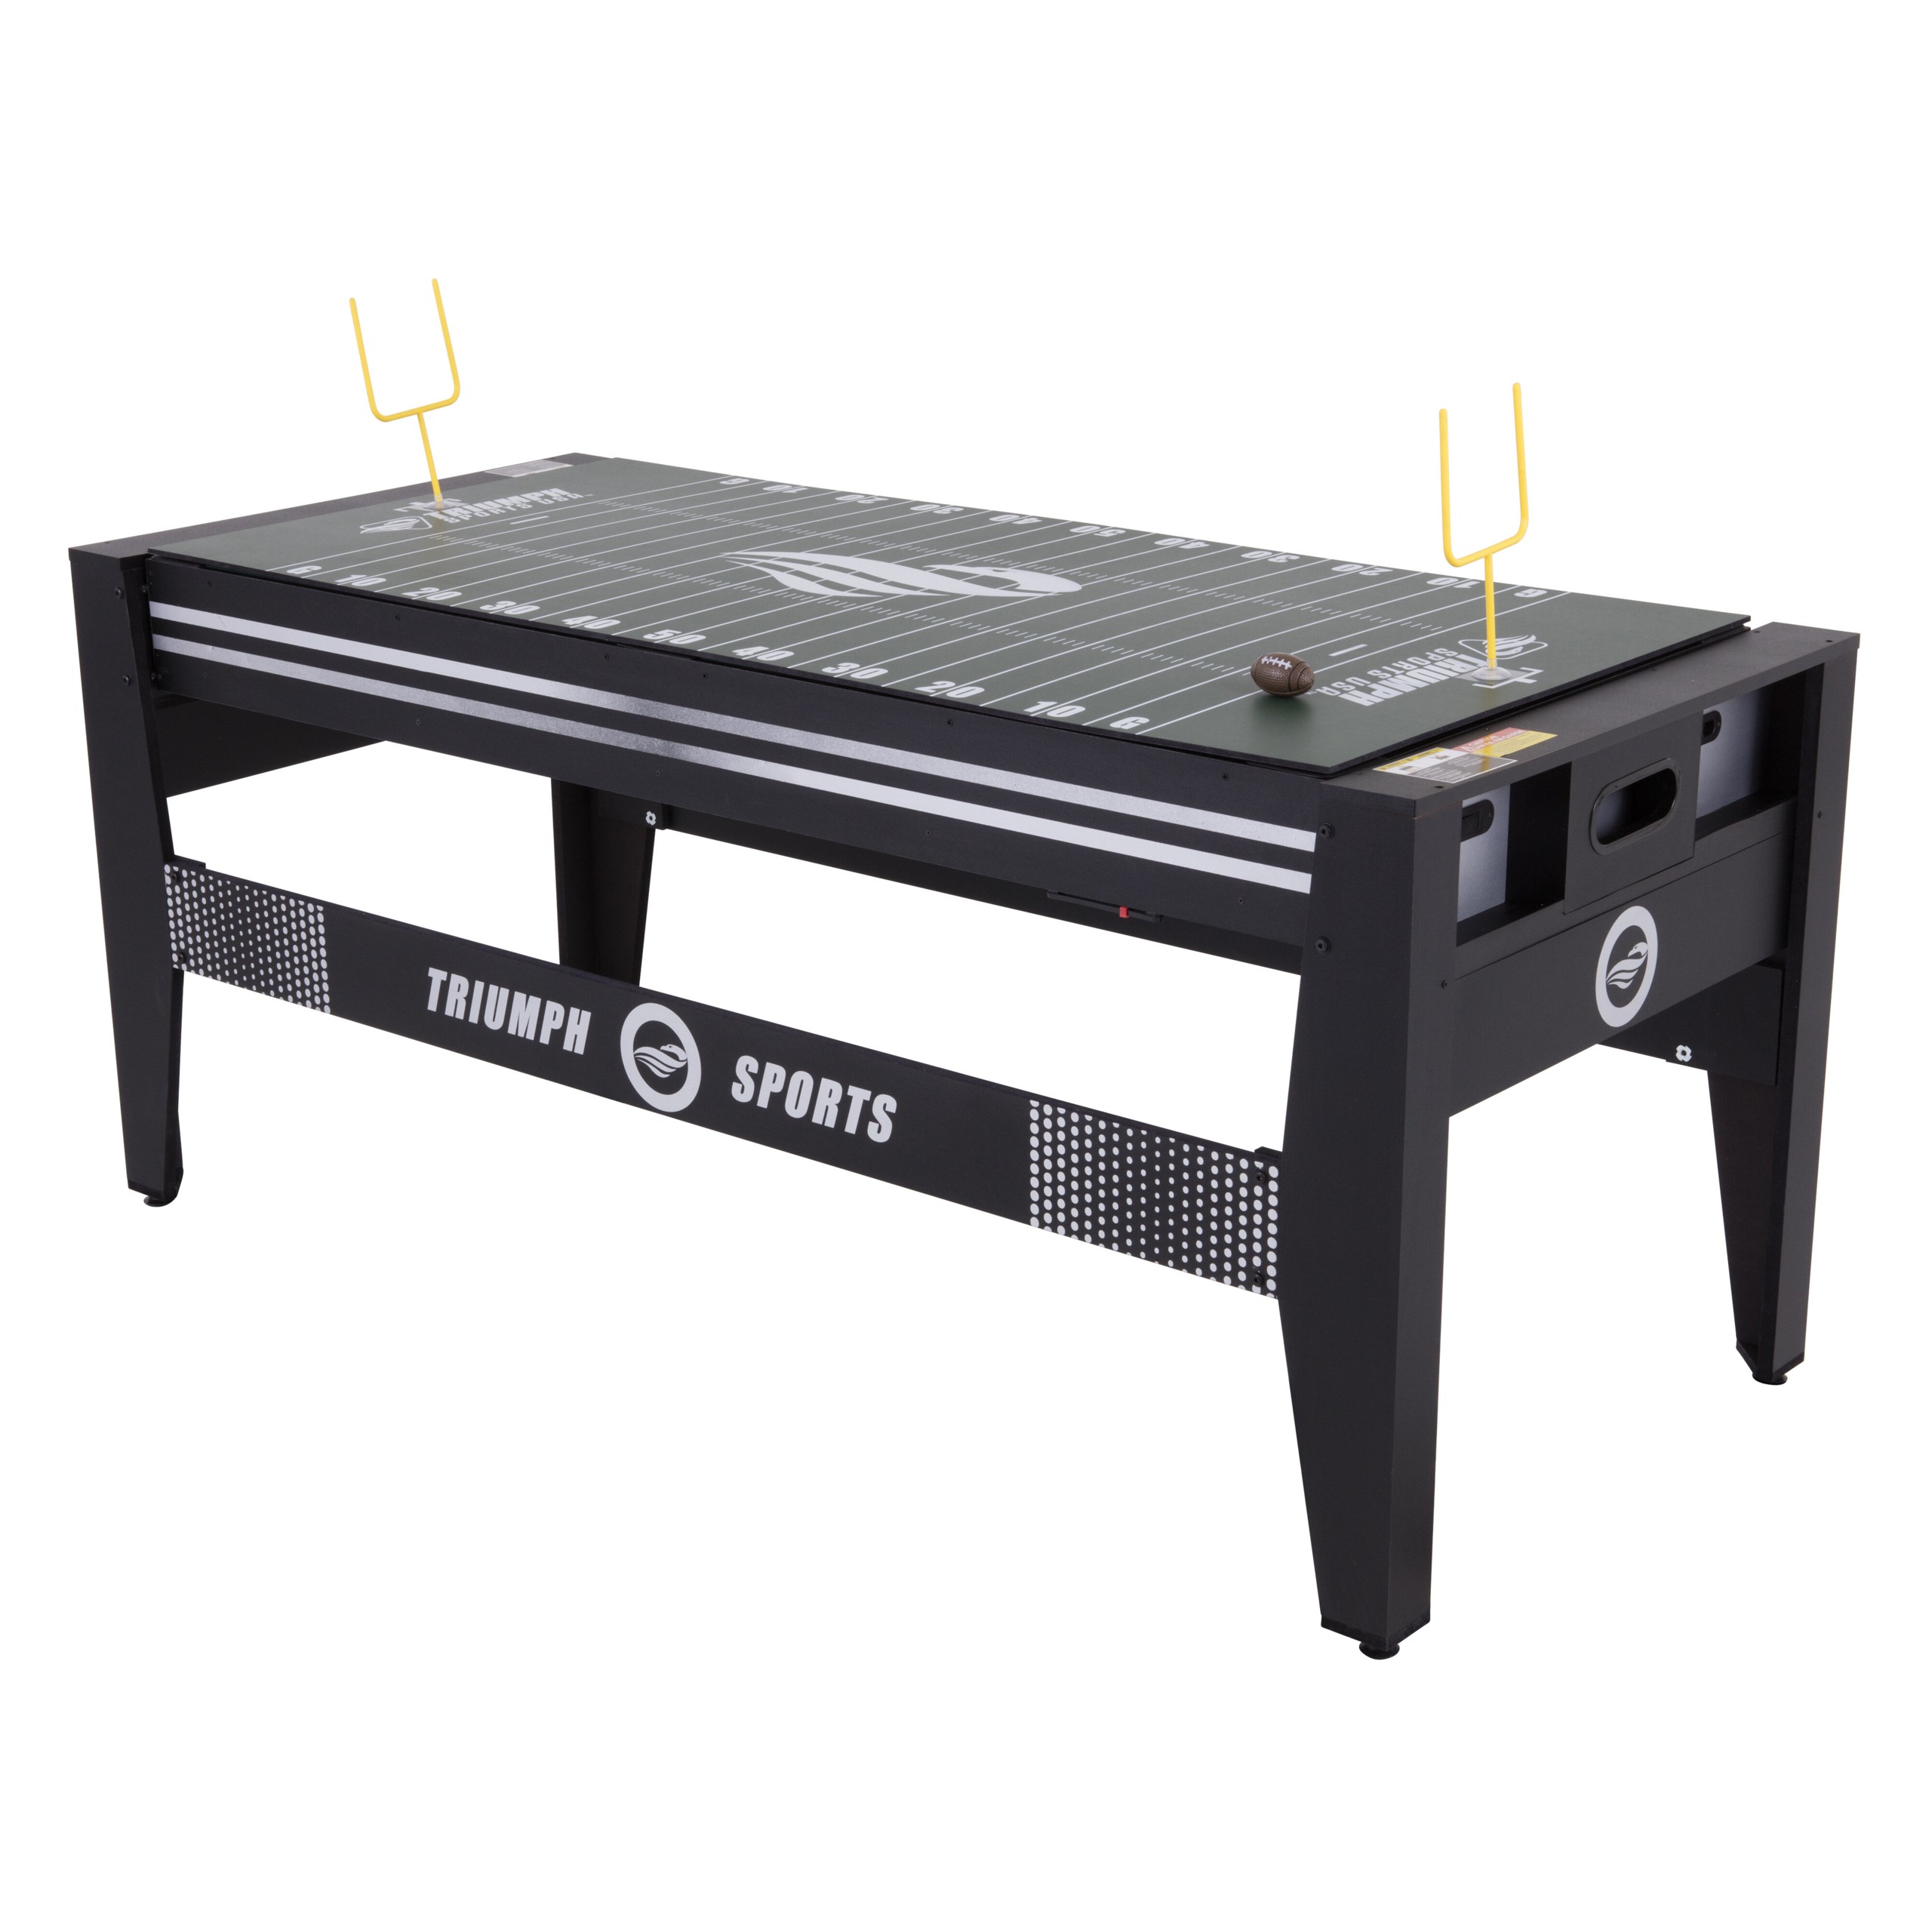 4-in-1 32" Multi Game Table